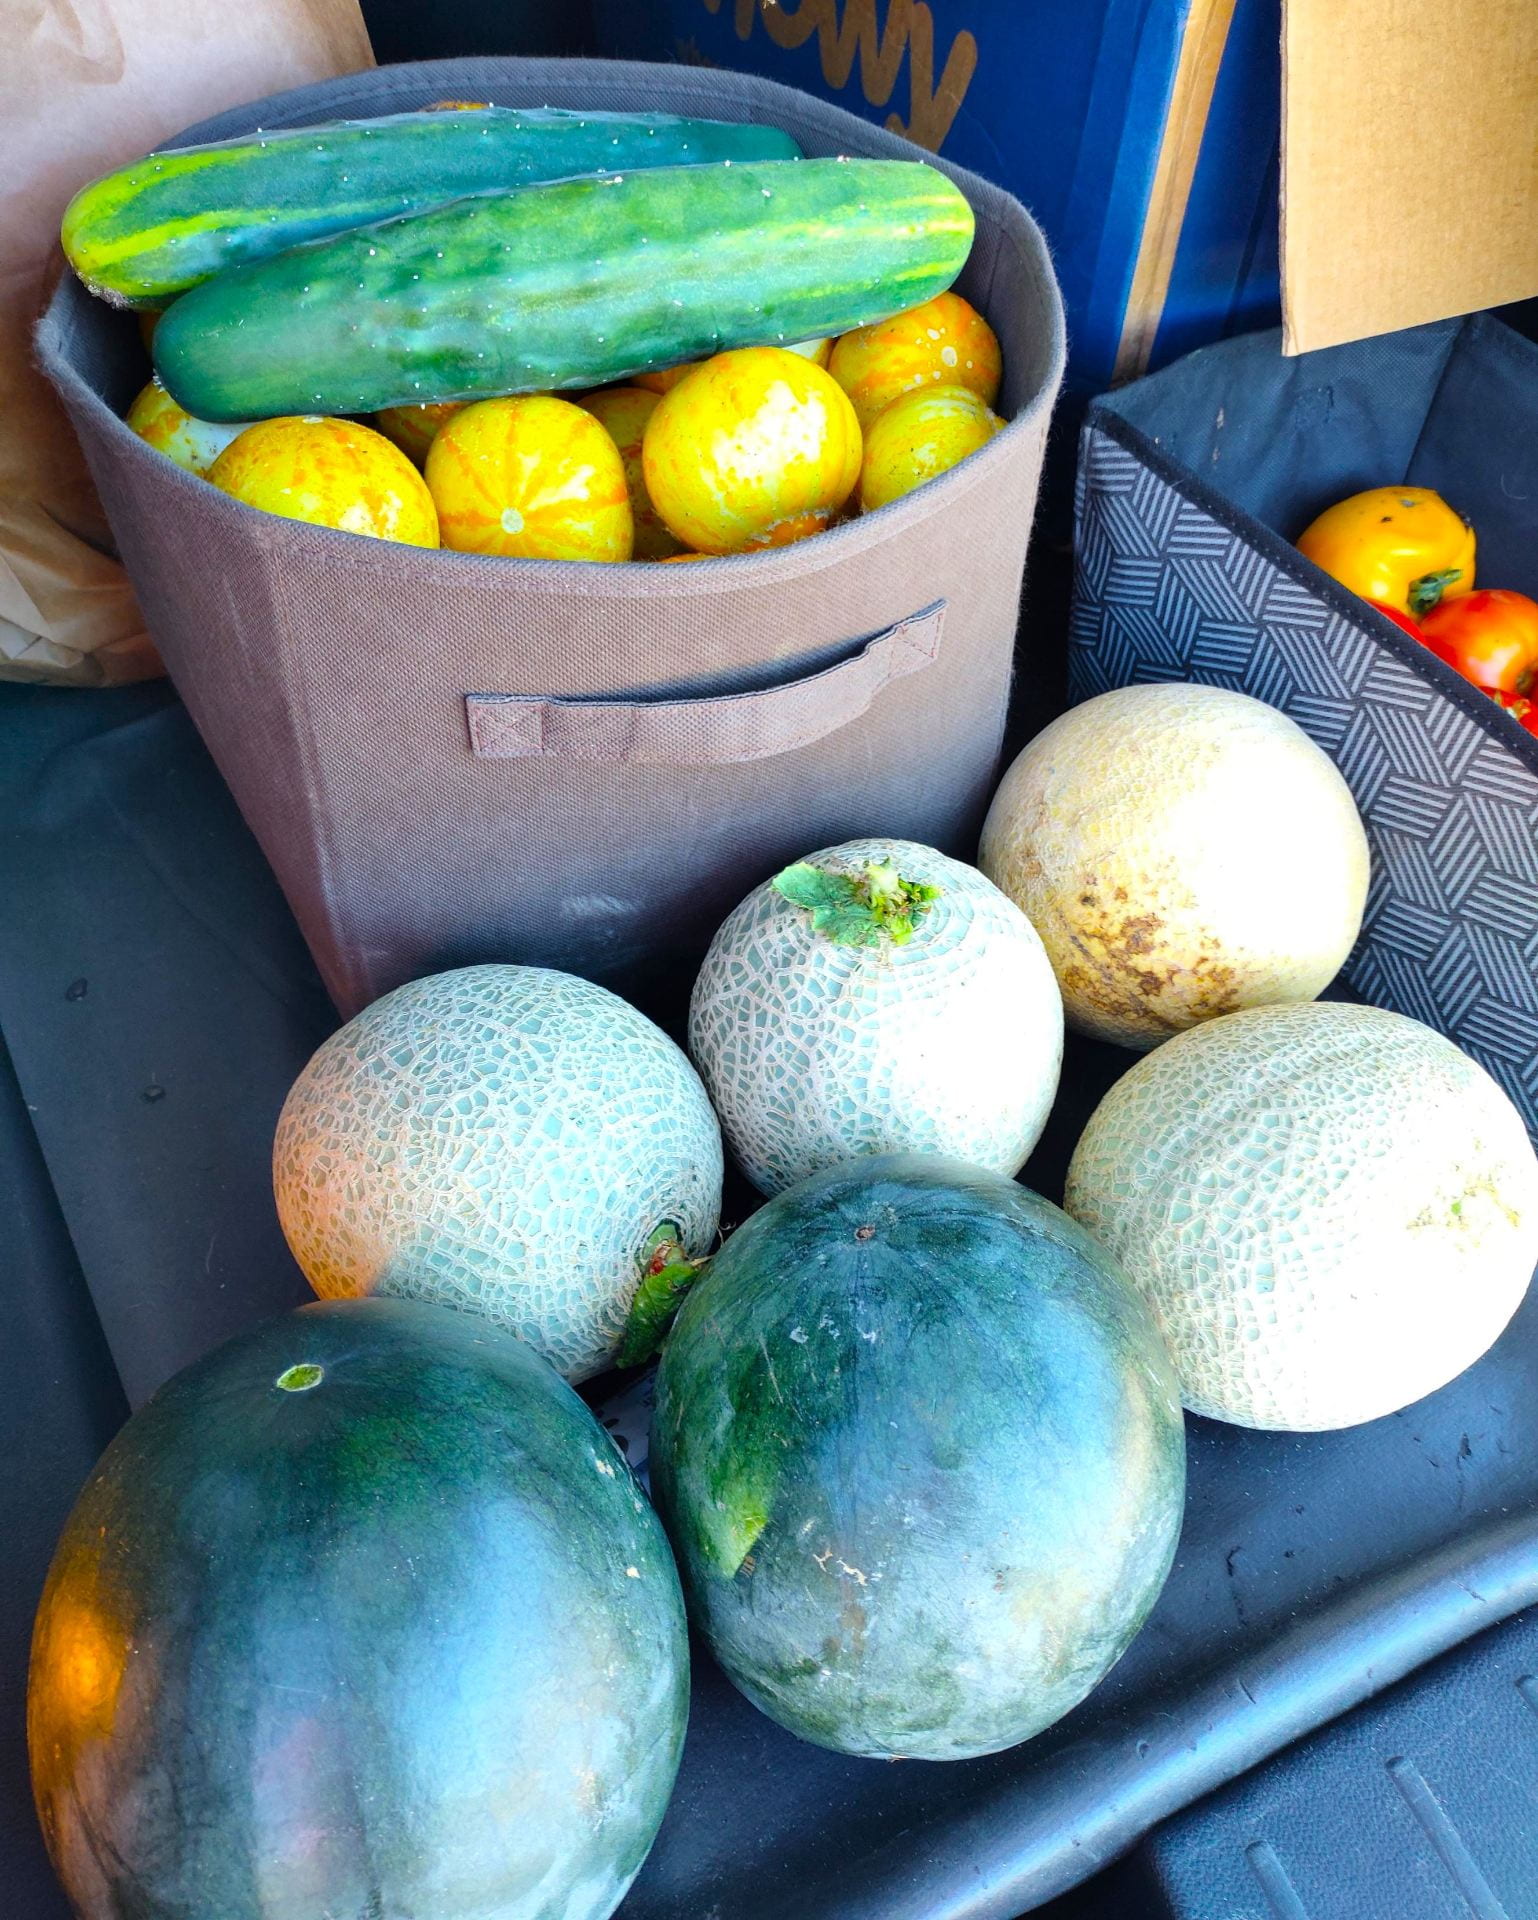 Melons and lemon cucumbers harvested from CCE for donation